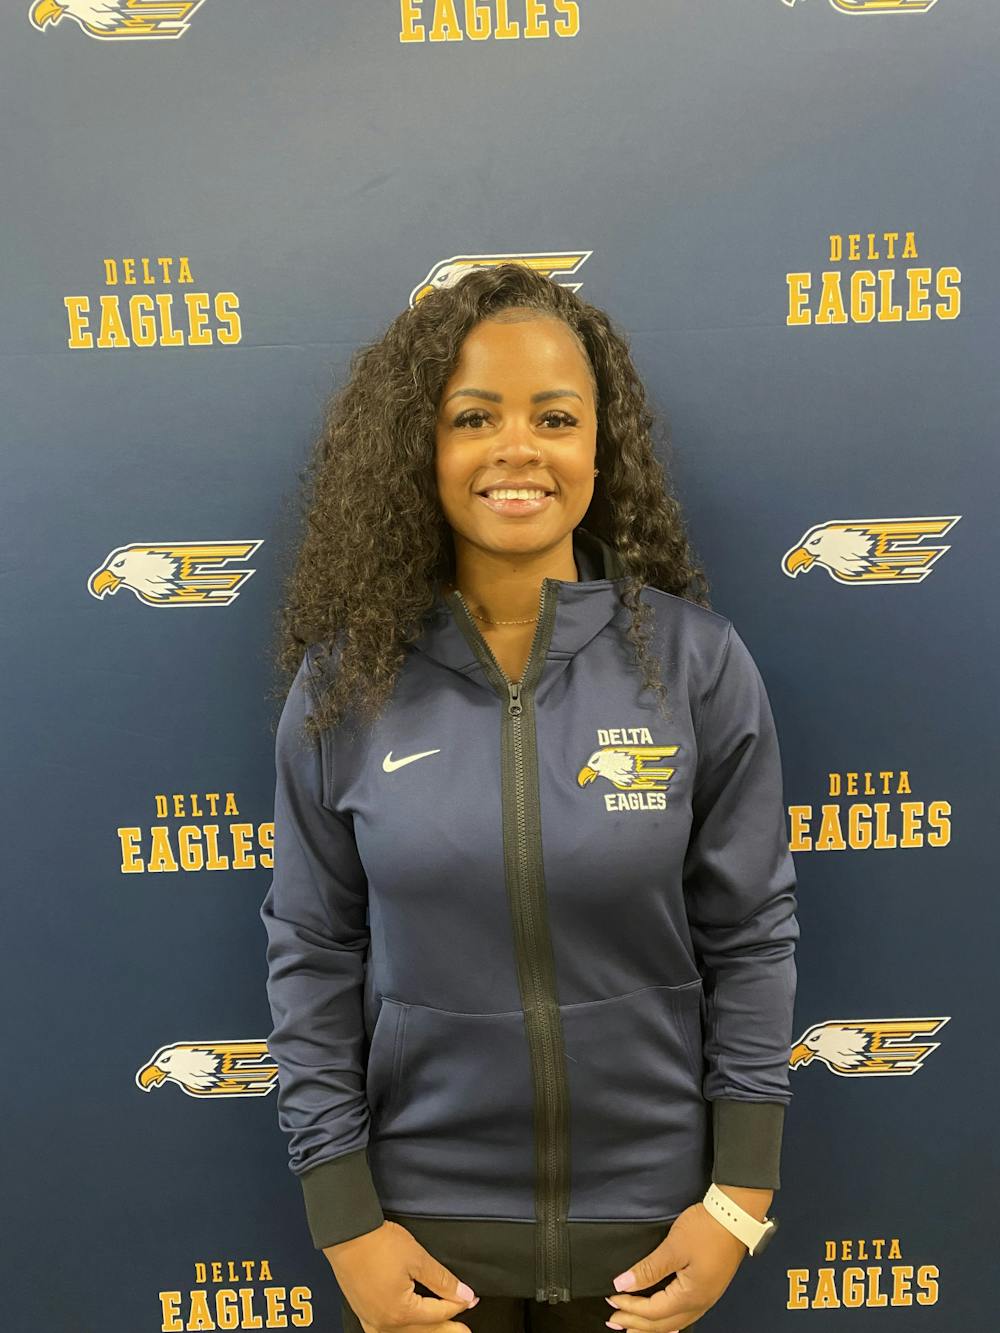 Former Ball State Women's Basketball player Ty’Ronda Benning poses for a picture as the new Girls' Basketball head coach at Delta High School. Delta Athletics, phot provided